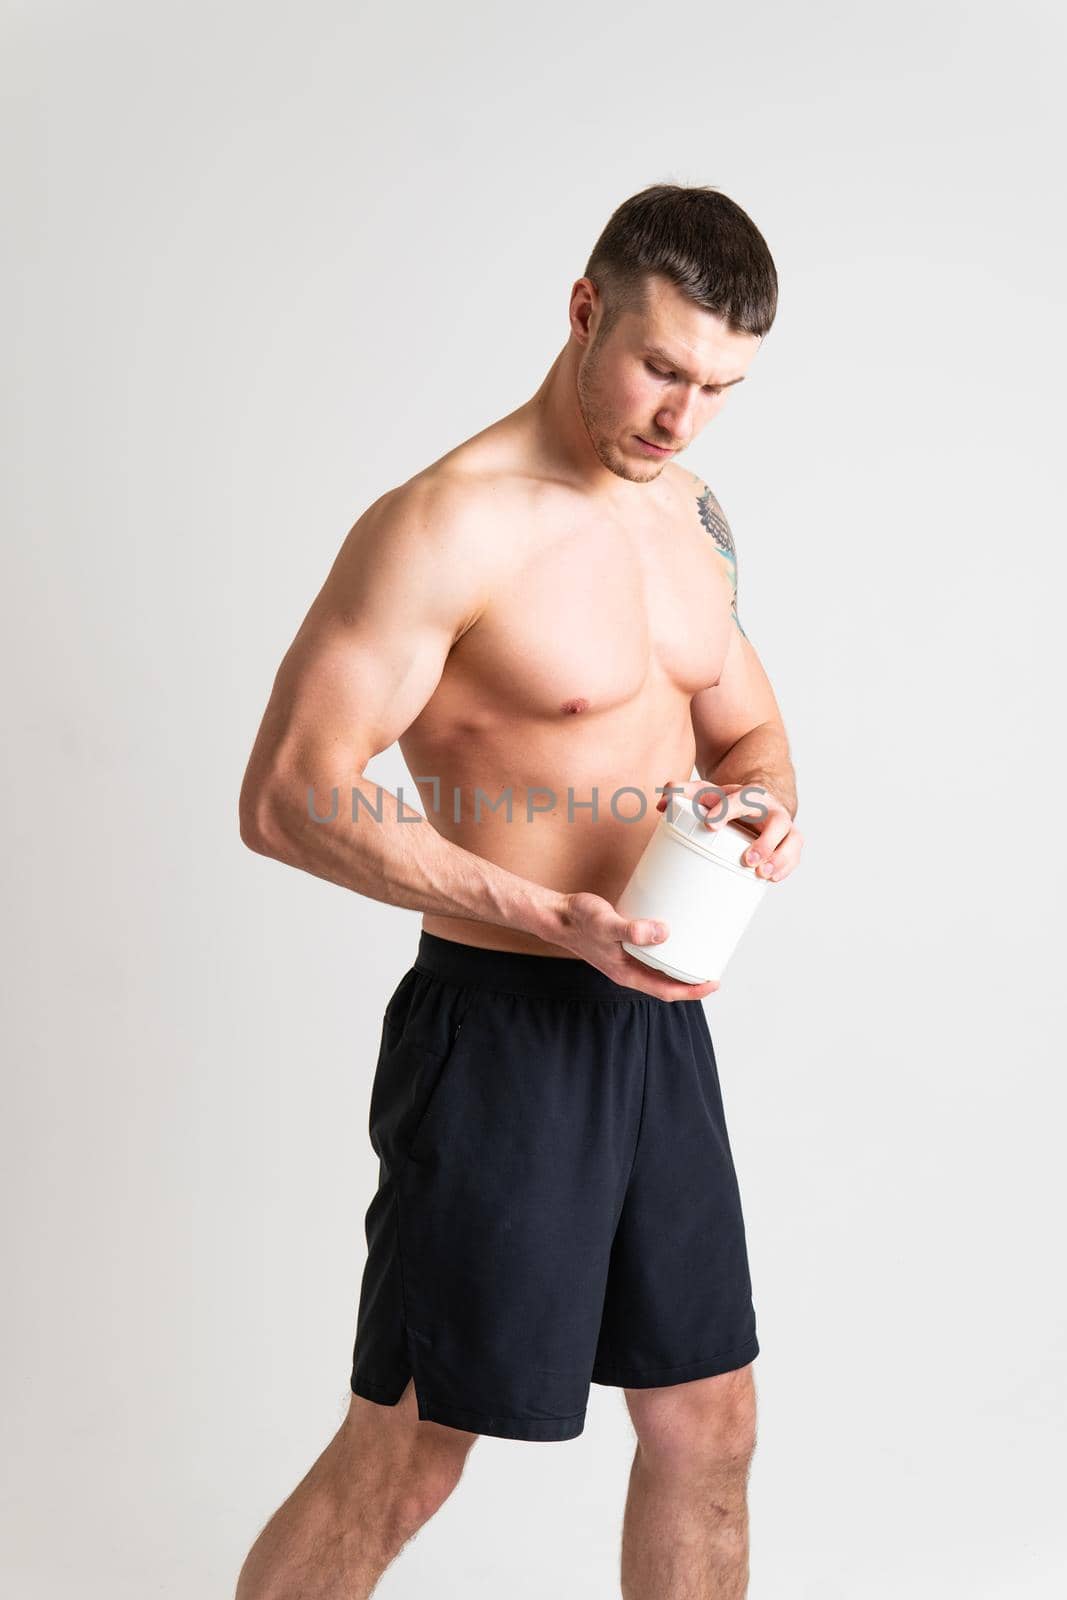 Fitness protein jars white on white background bodybuilder powder strong high pain muscle, cramp person male health medical, illness holding. Touching neck therapy, back suffer attractive